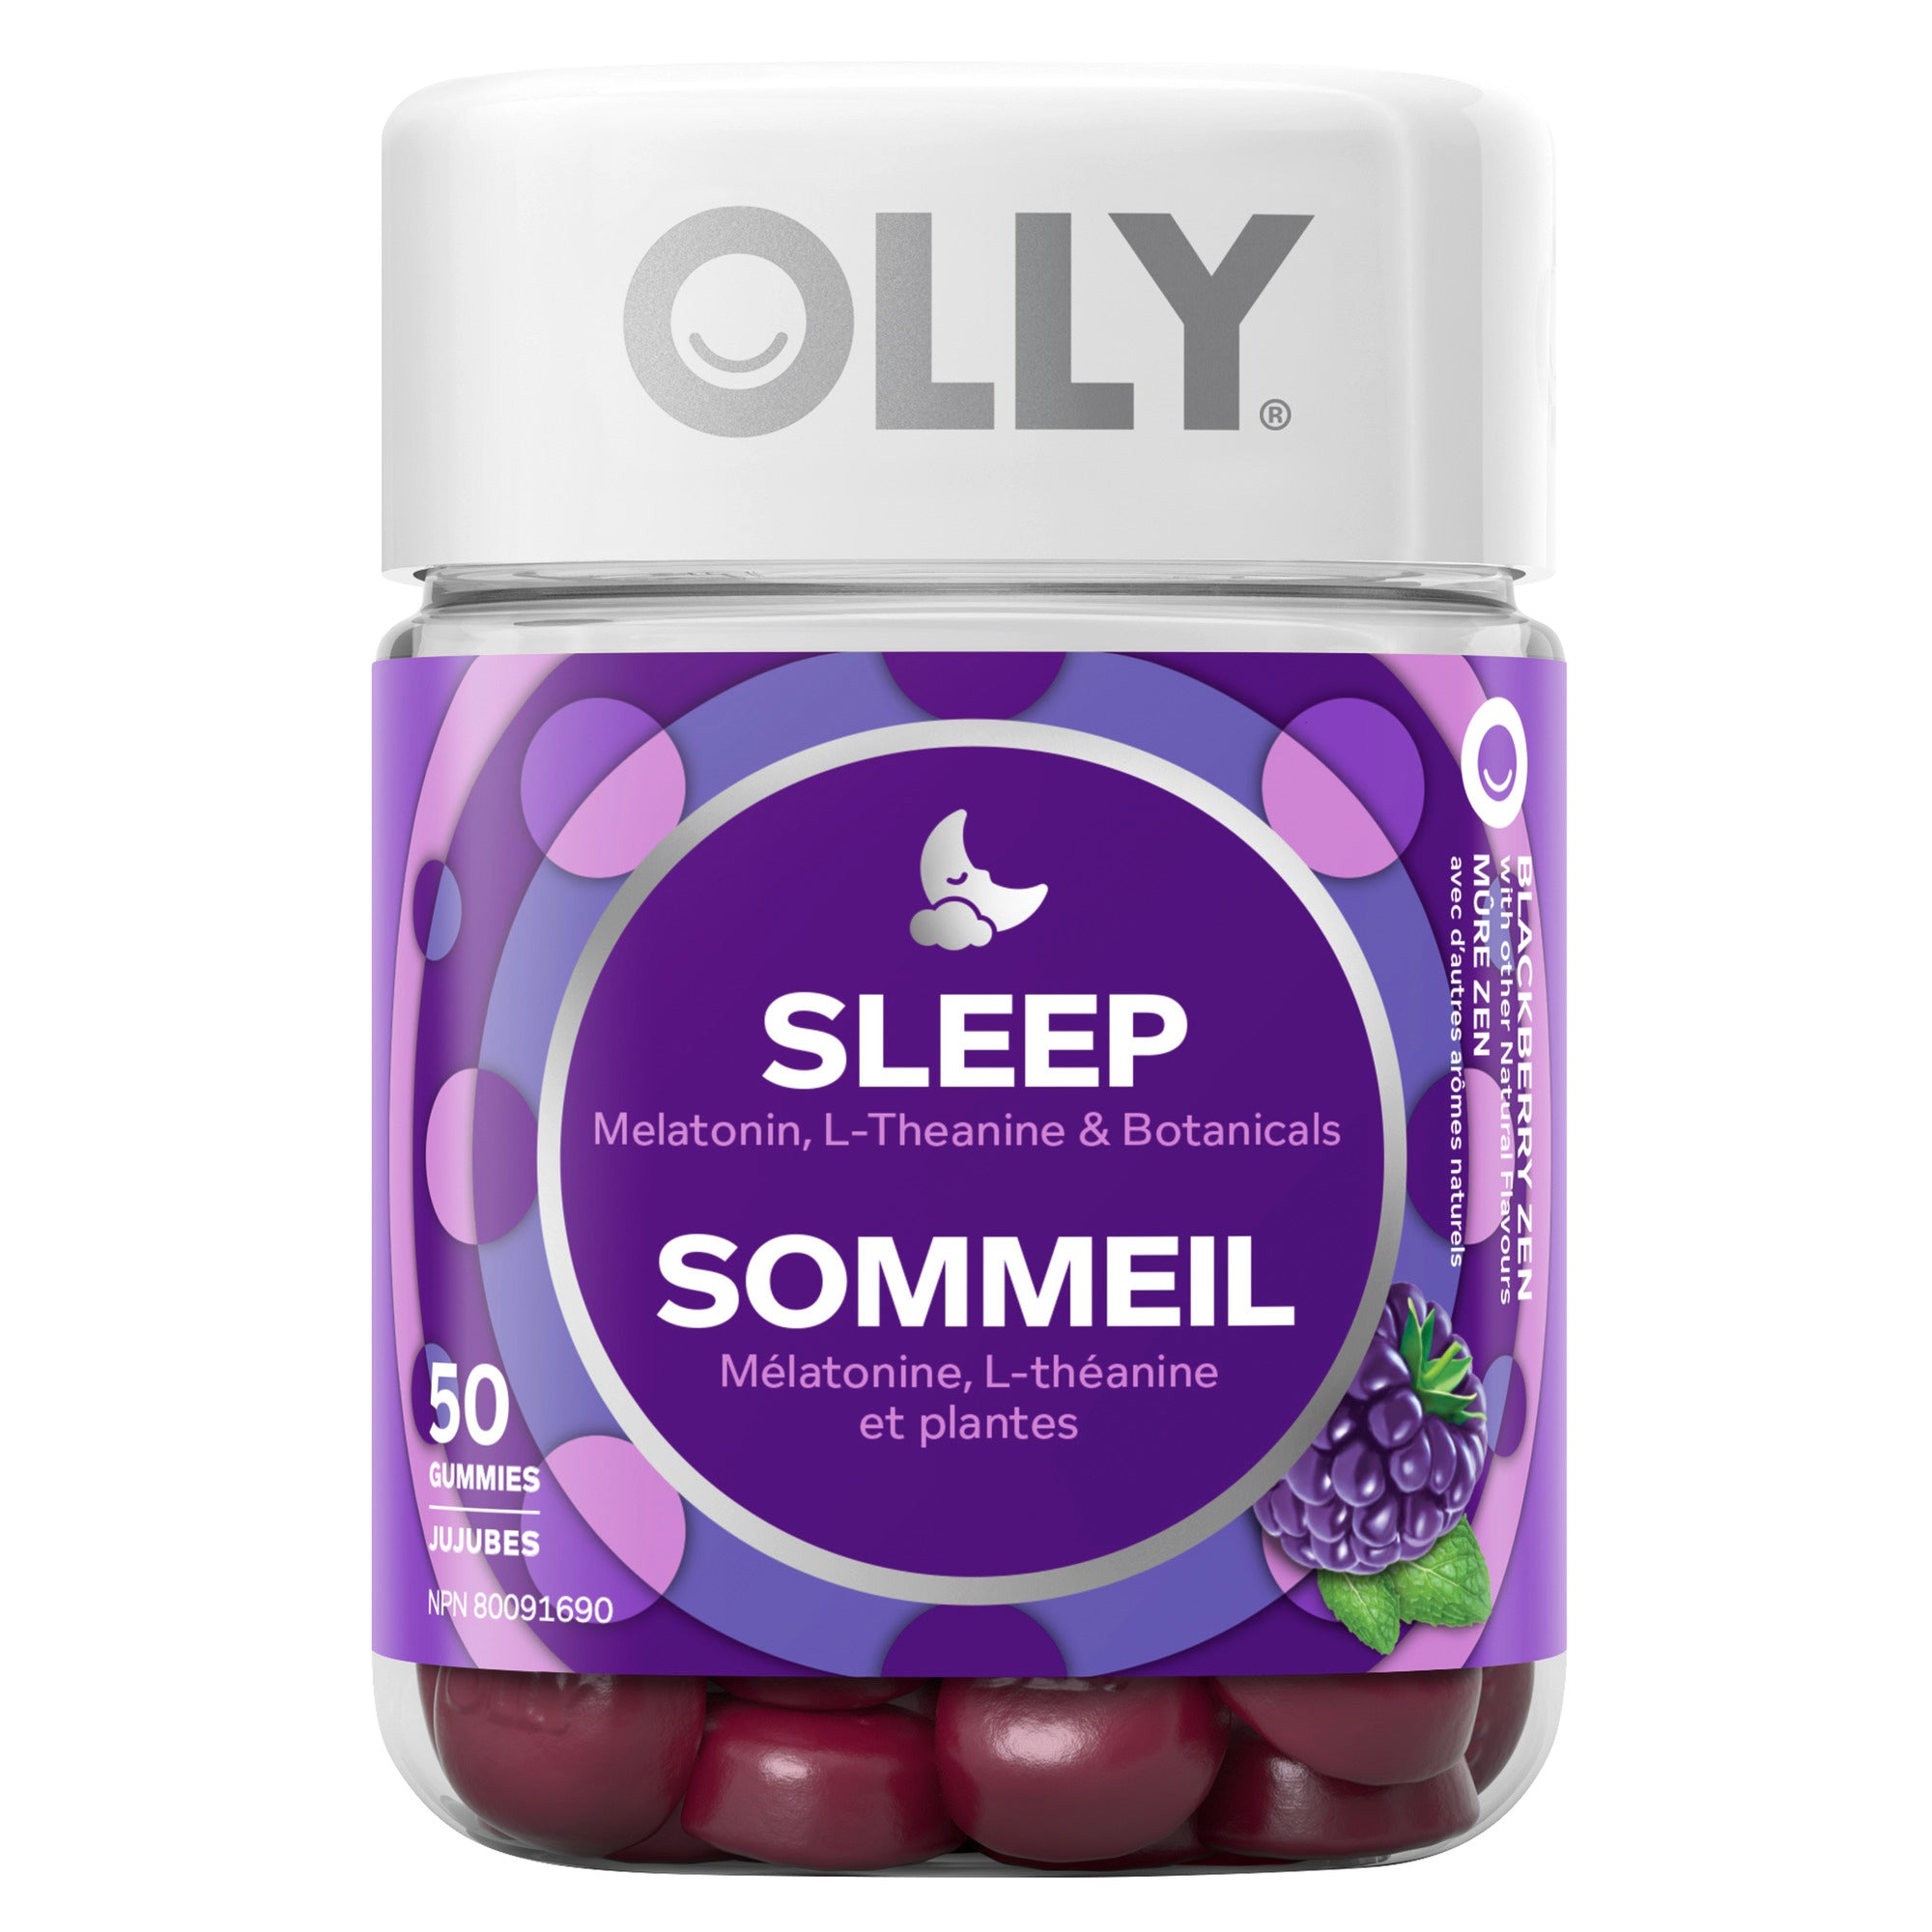 The front of the purple OLLY Sleep 50 Gummies Container.